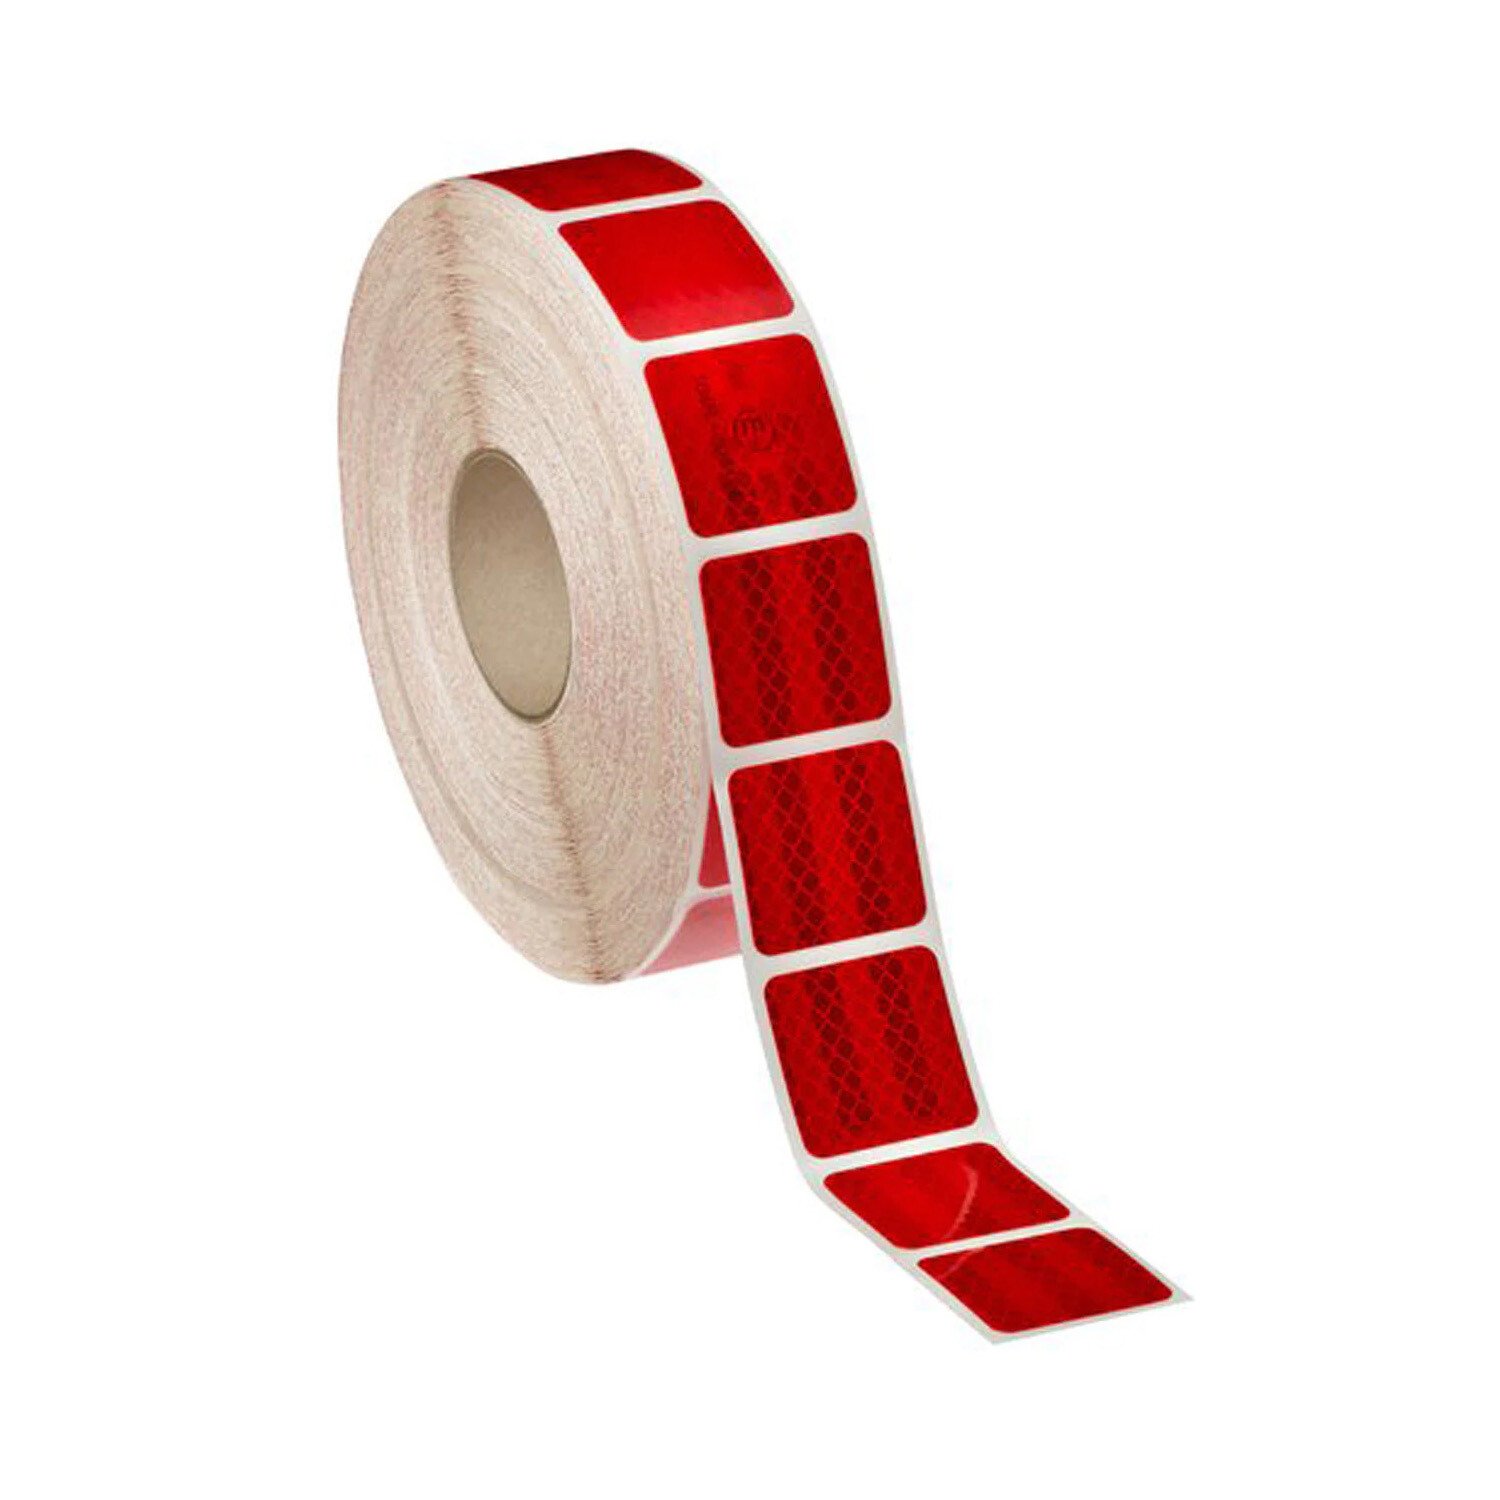 Reflective truck contour foil for tarpaulin (Roll) 1pc - Red segmented thumb